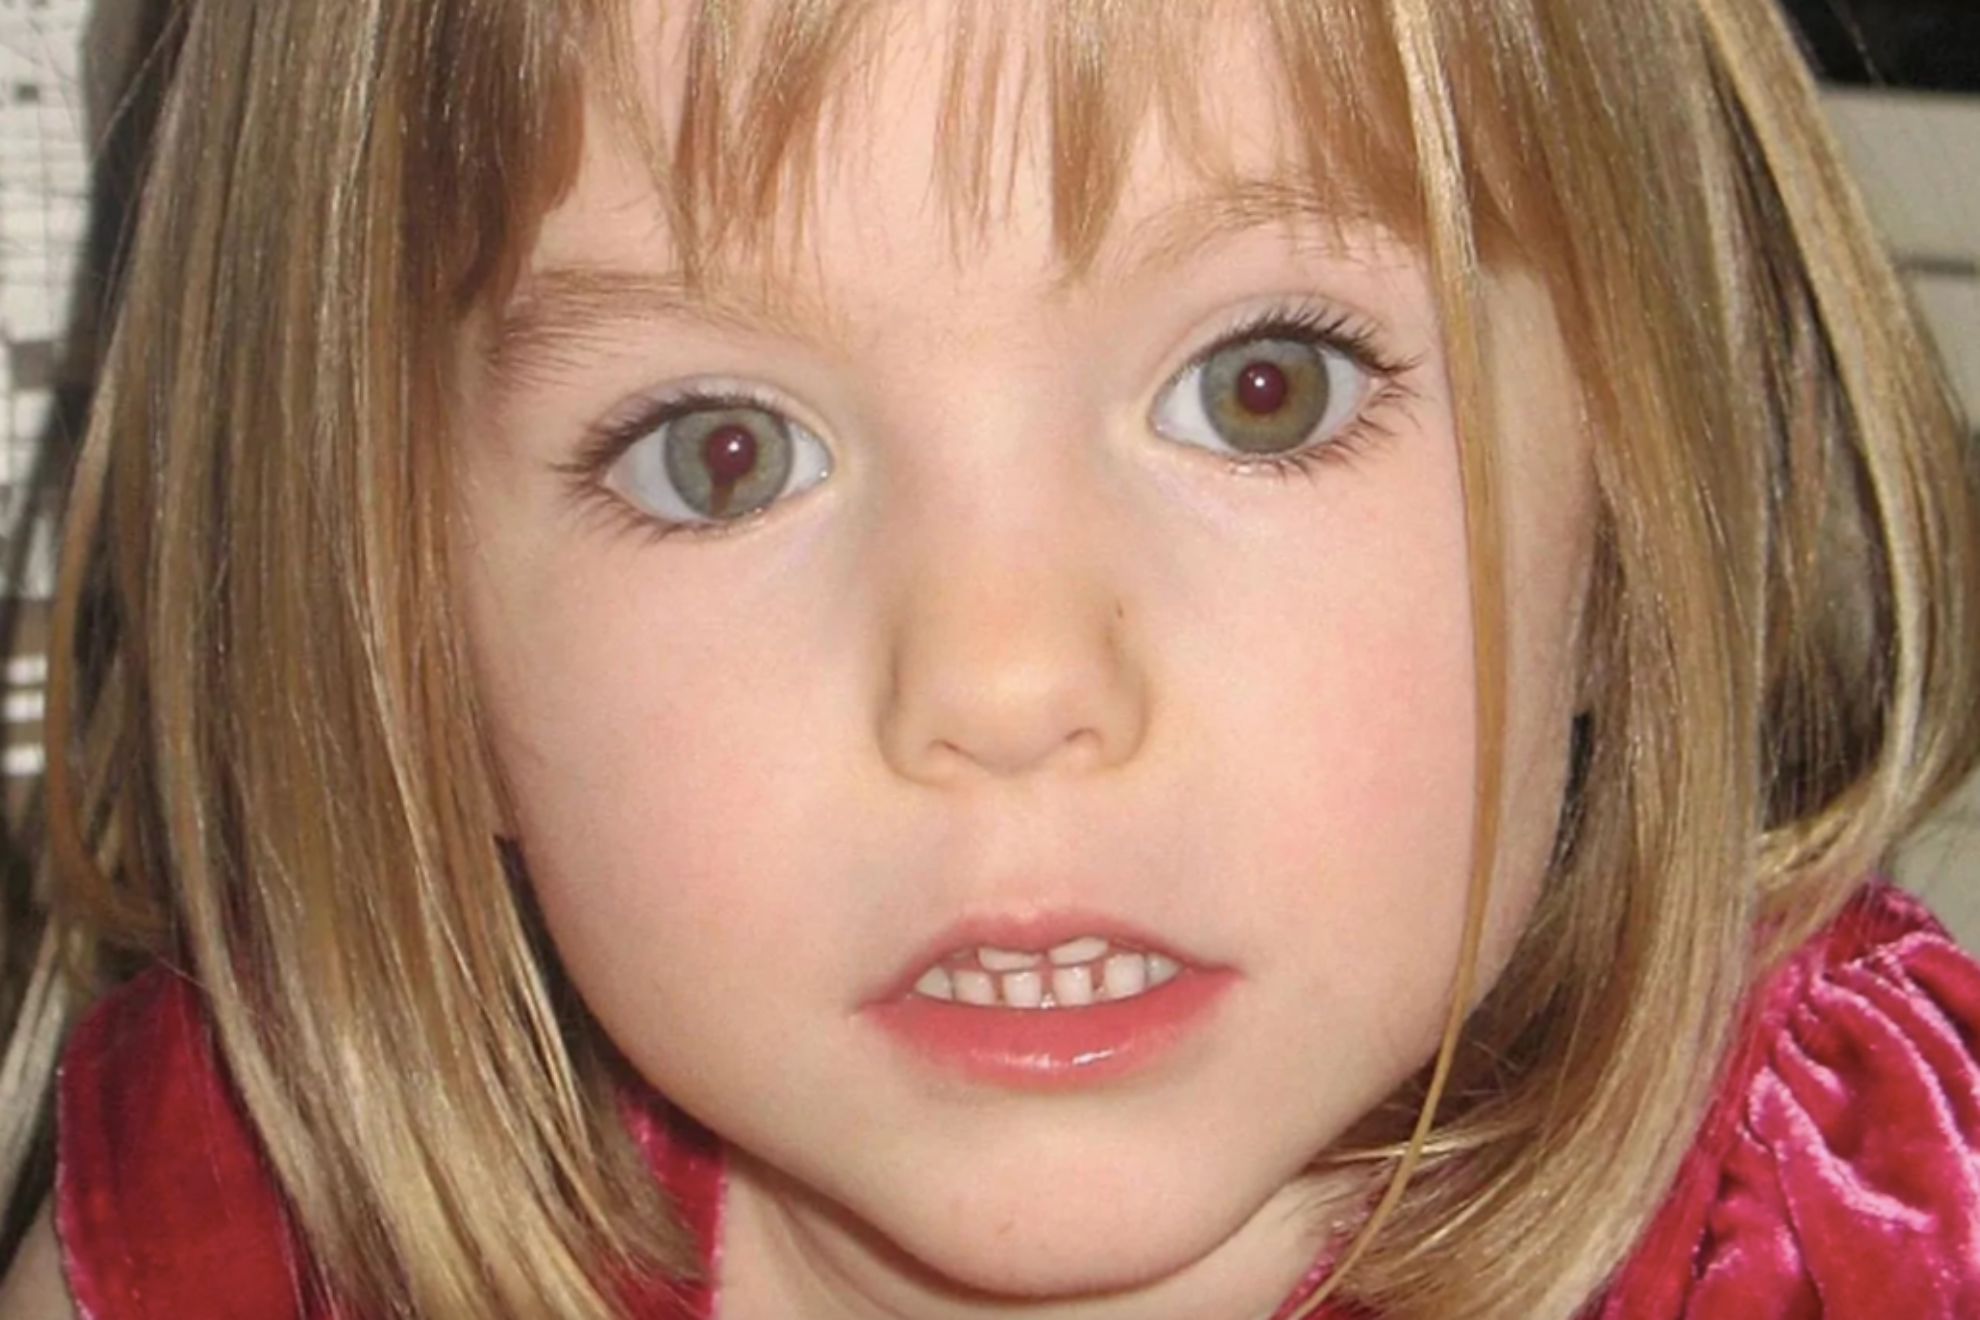 Suspected Madeleine McCann kidnapper could be released before probe ends